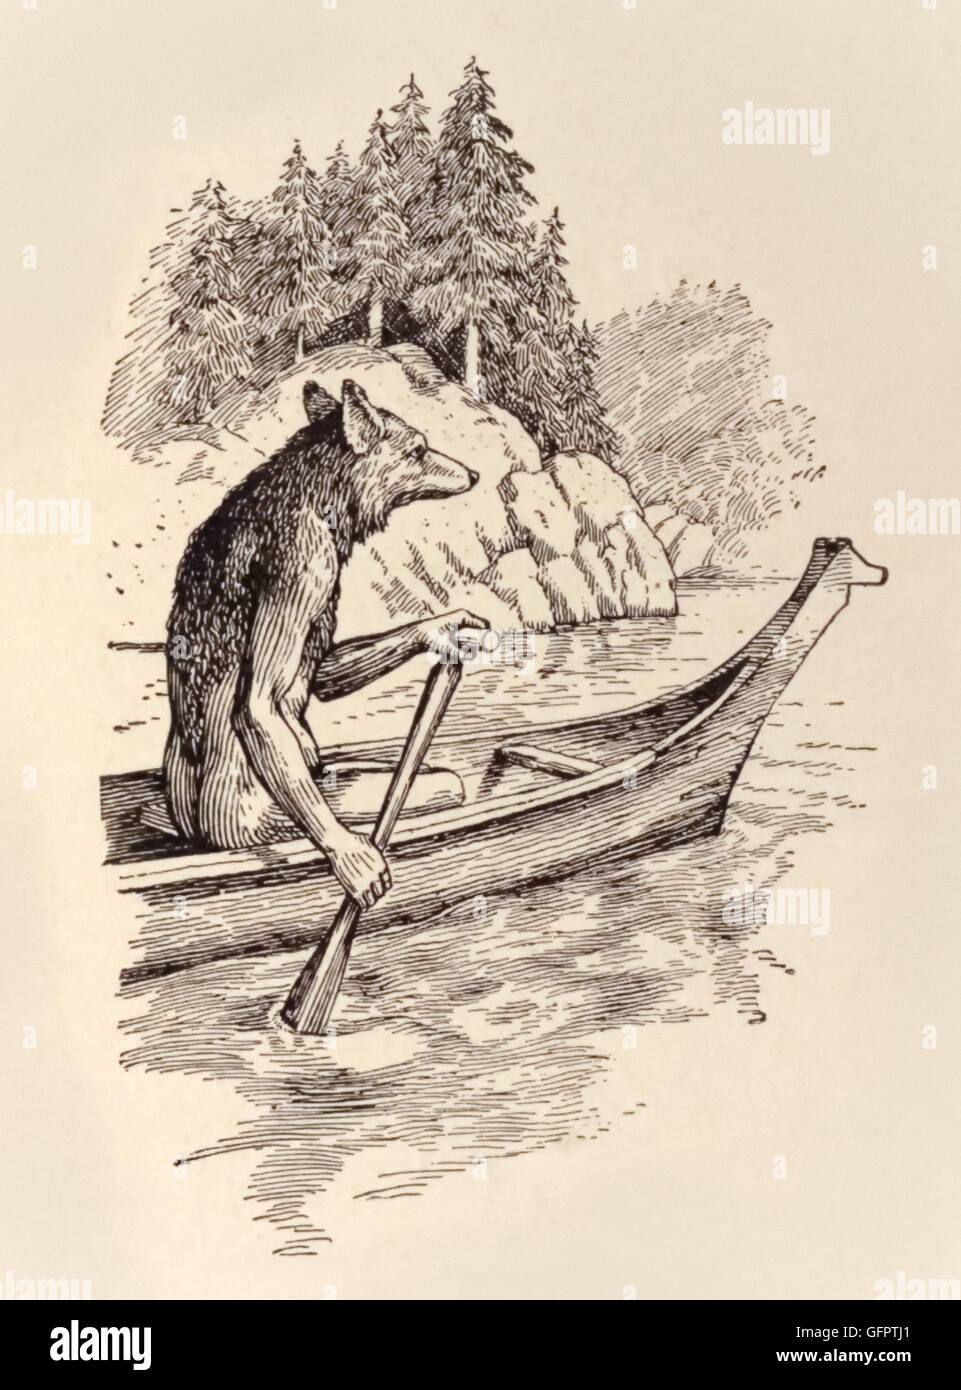 “Coyote went up the river.” From ‘Adventures of the Coyote’ an anthropomorphic character common to the folklore of many indigenous North American peoples. Illustration of a Salish Indian traditional story by Frederick N. Wilson (1876-1961). Stock Photo